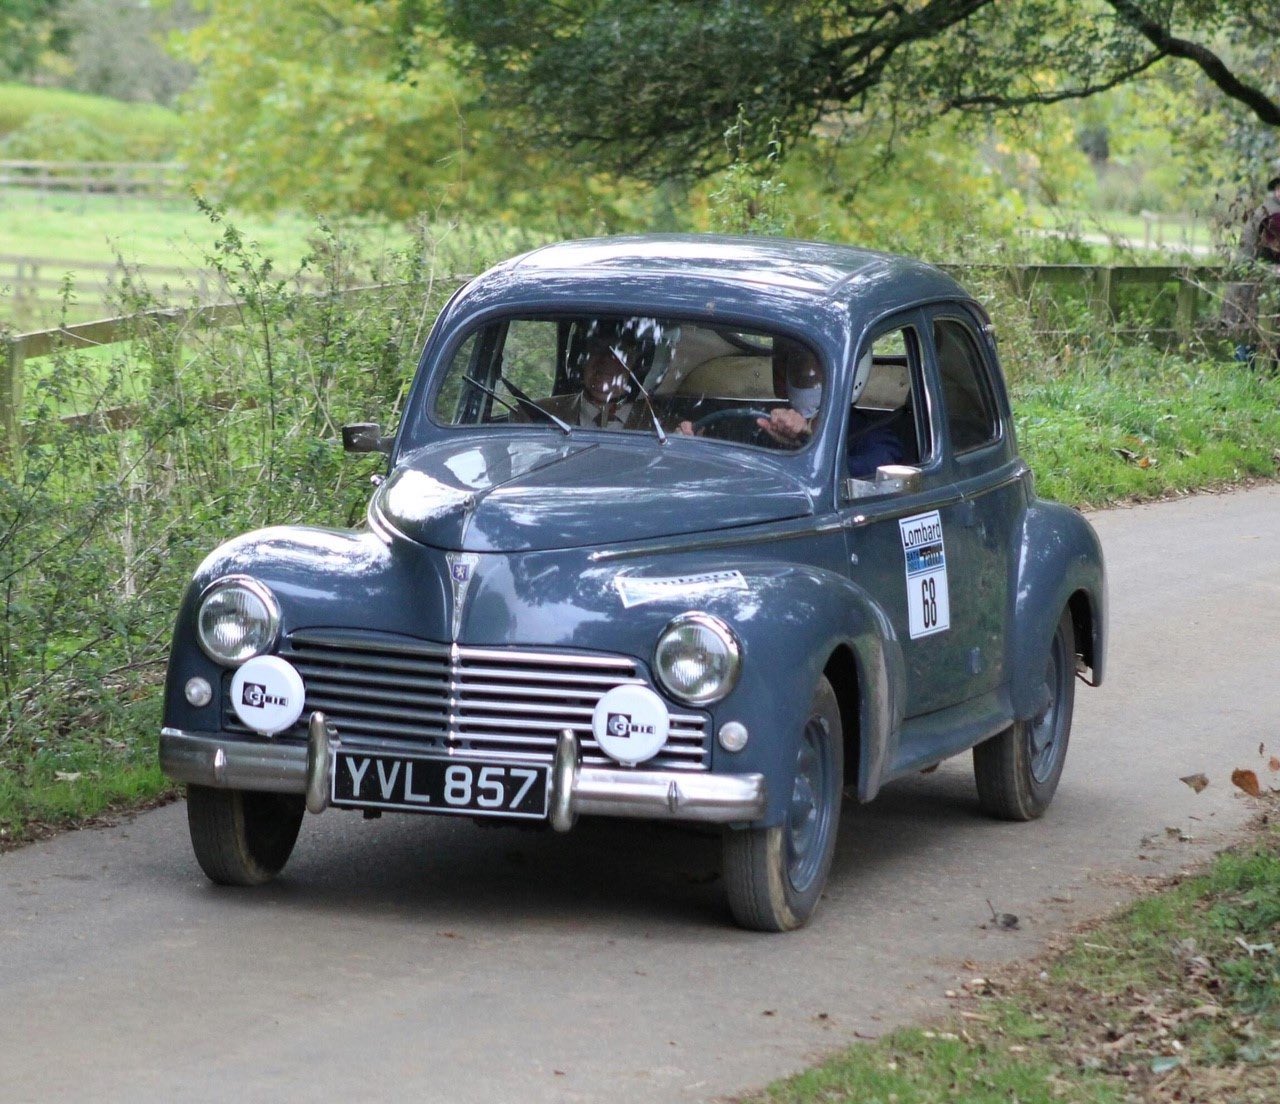 Lombard Rally Festival heads to Grimsthorpe Castle in July